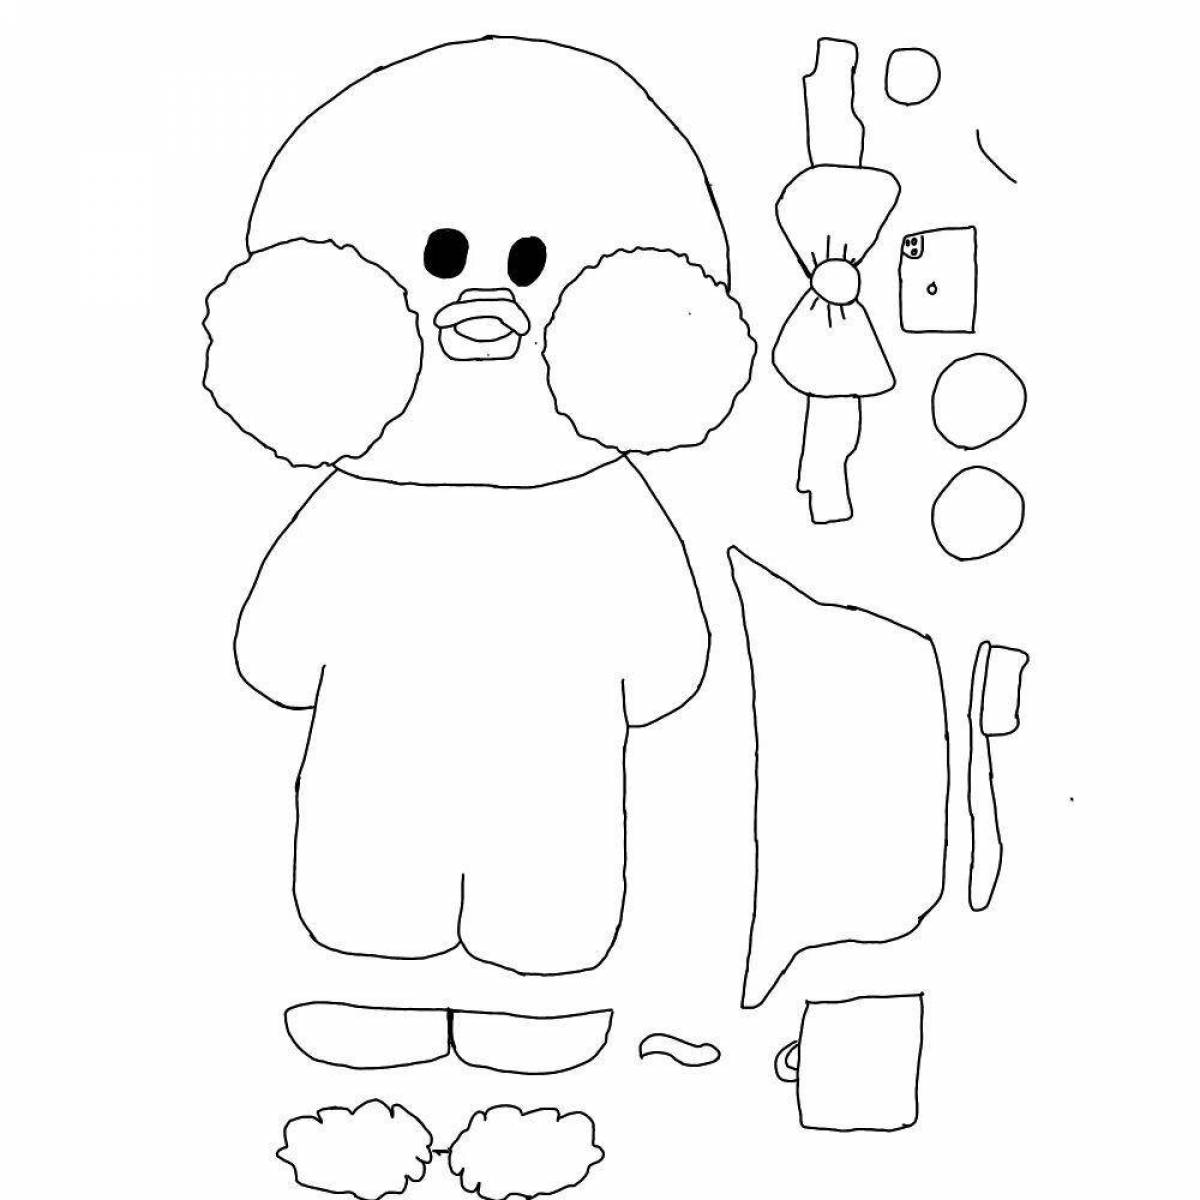 Lalafan duck coloring page with clothes